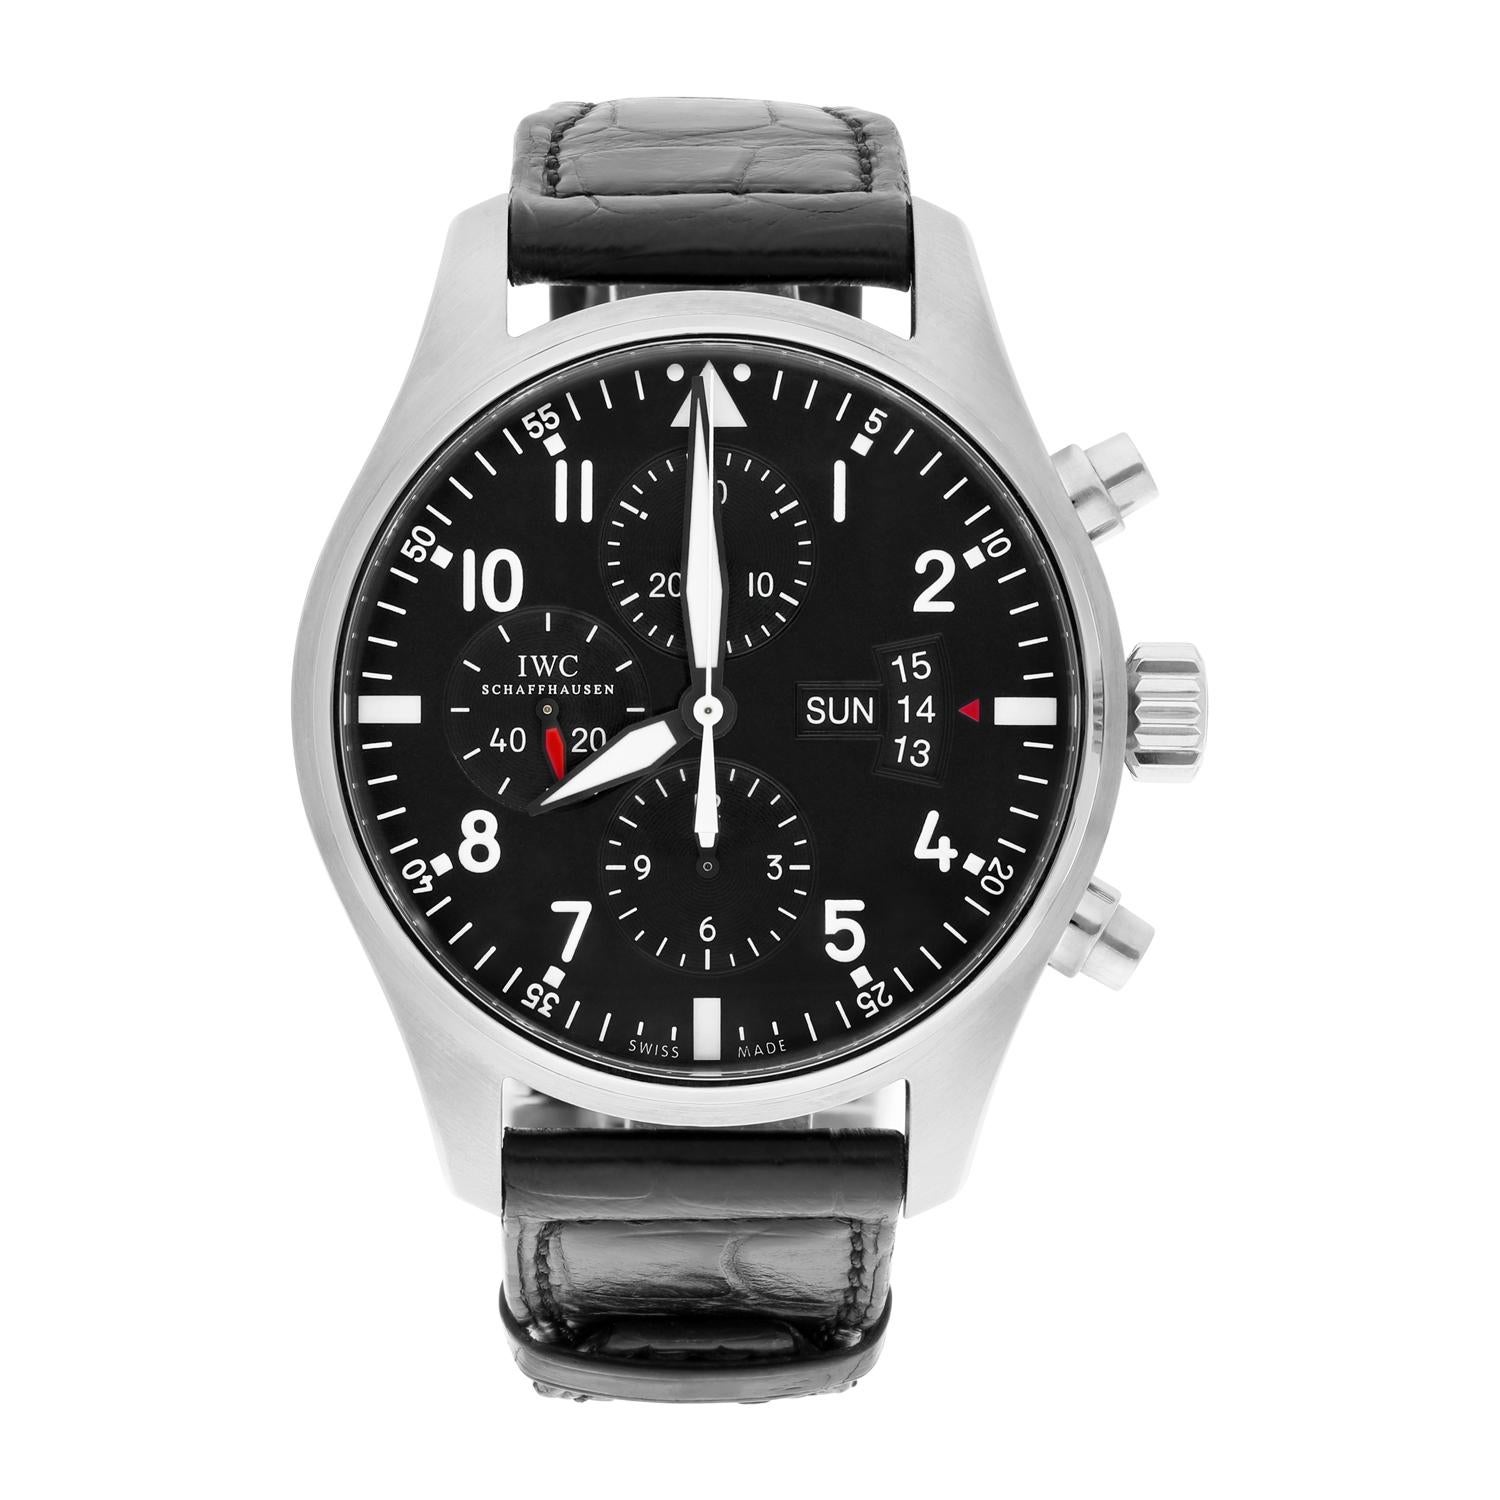 This IWC Pilot watch (reference number IW377701) features a sleek silver case and black leather strap with a black dial. The watch has a round shape with a case size of approximately 43mm (1.7 inches) and a lug width of 21mm (0.8 inch). It has an